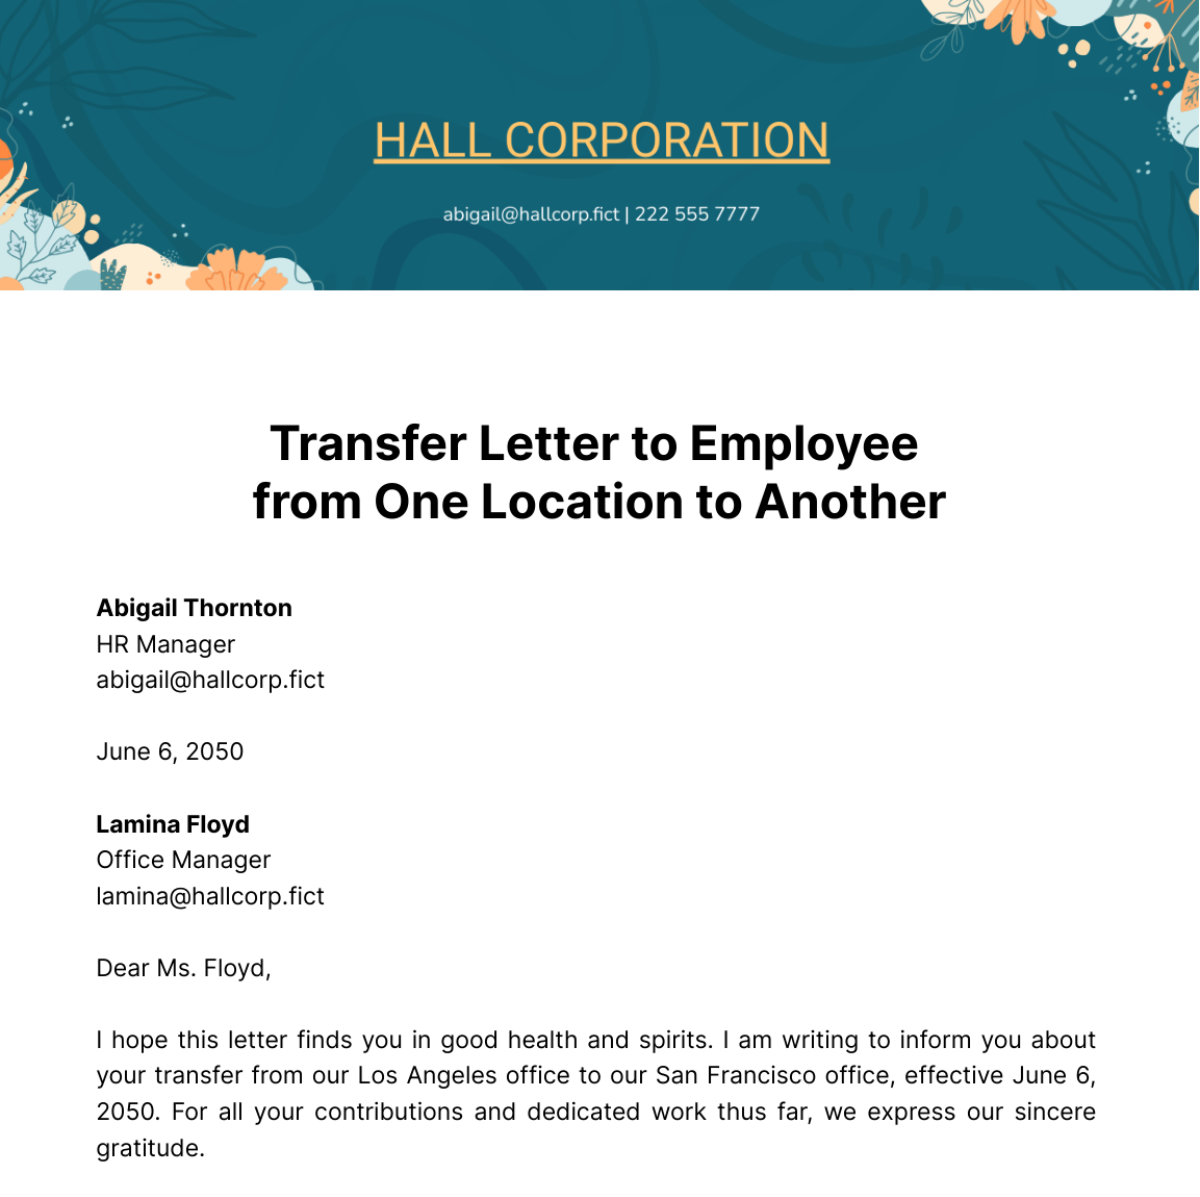 Transfer Letter to Employee from One Location to Another Template